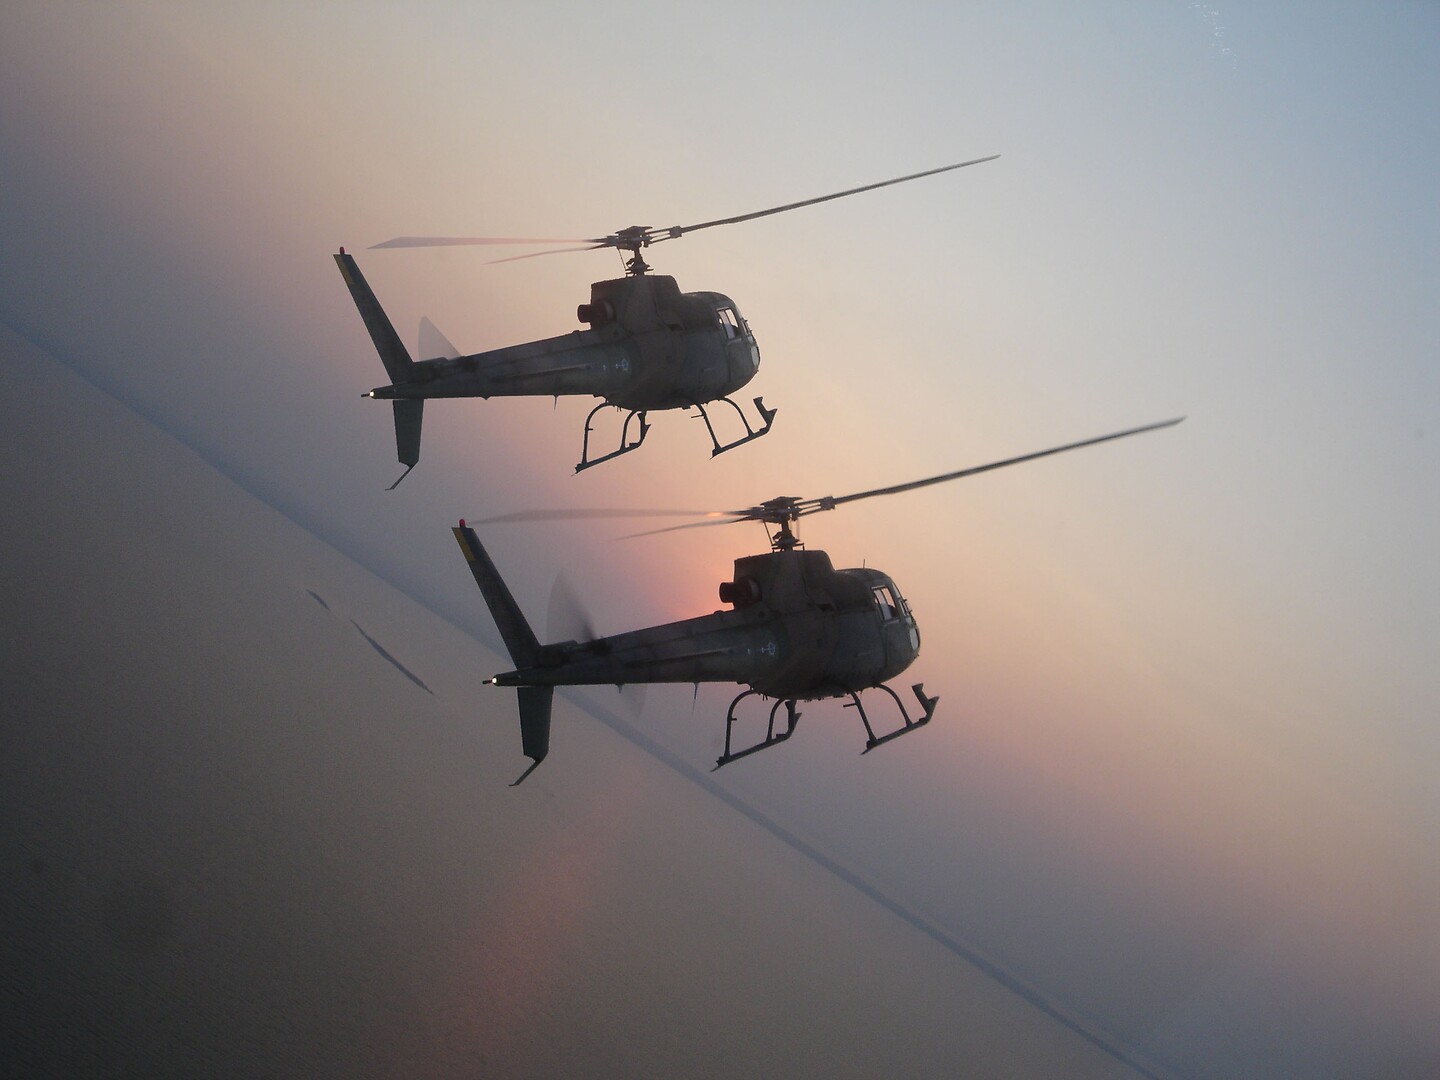 Two Brizilian Armed Forces H125 helicopters bank in formation.